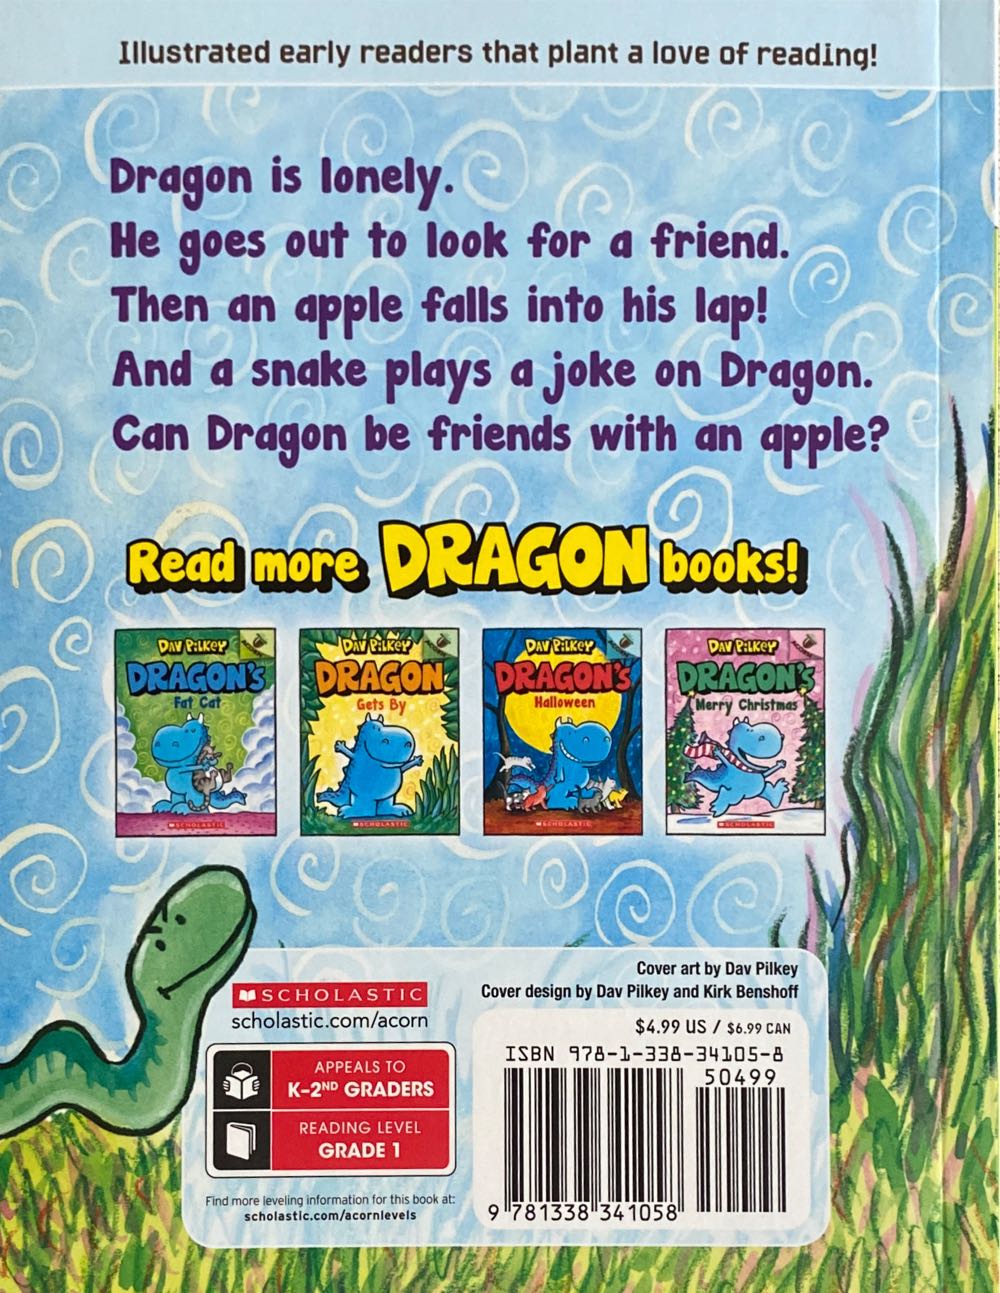 A Friend for Dragon - Dav Pilkey (Scholastic - Paperback) book collectible [Barcode 9781338341058] - Main Image 2